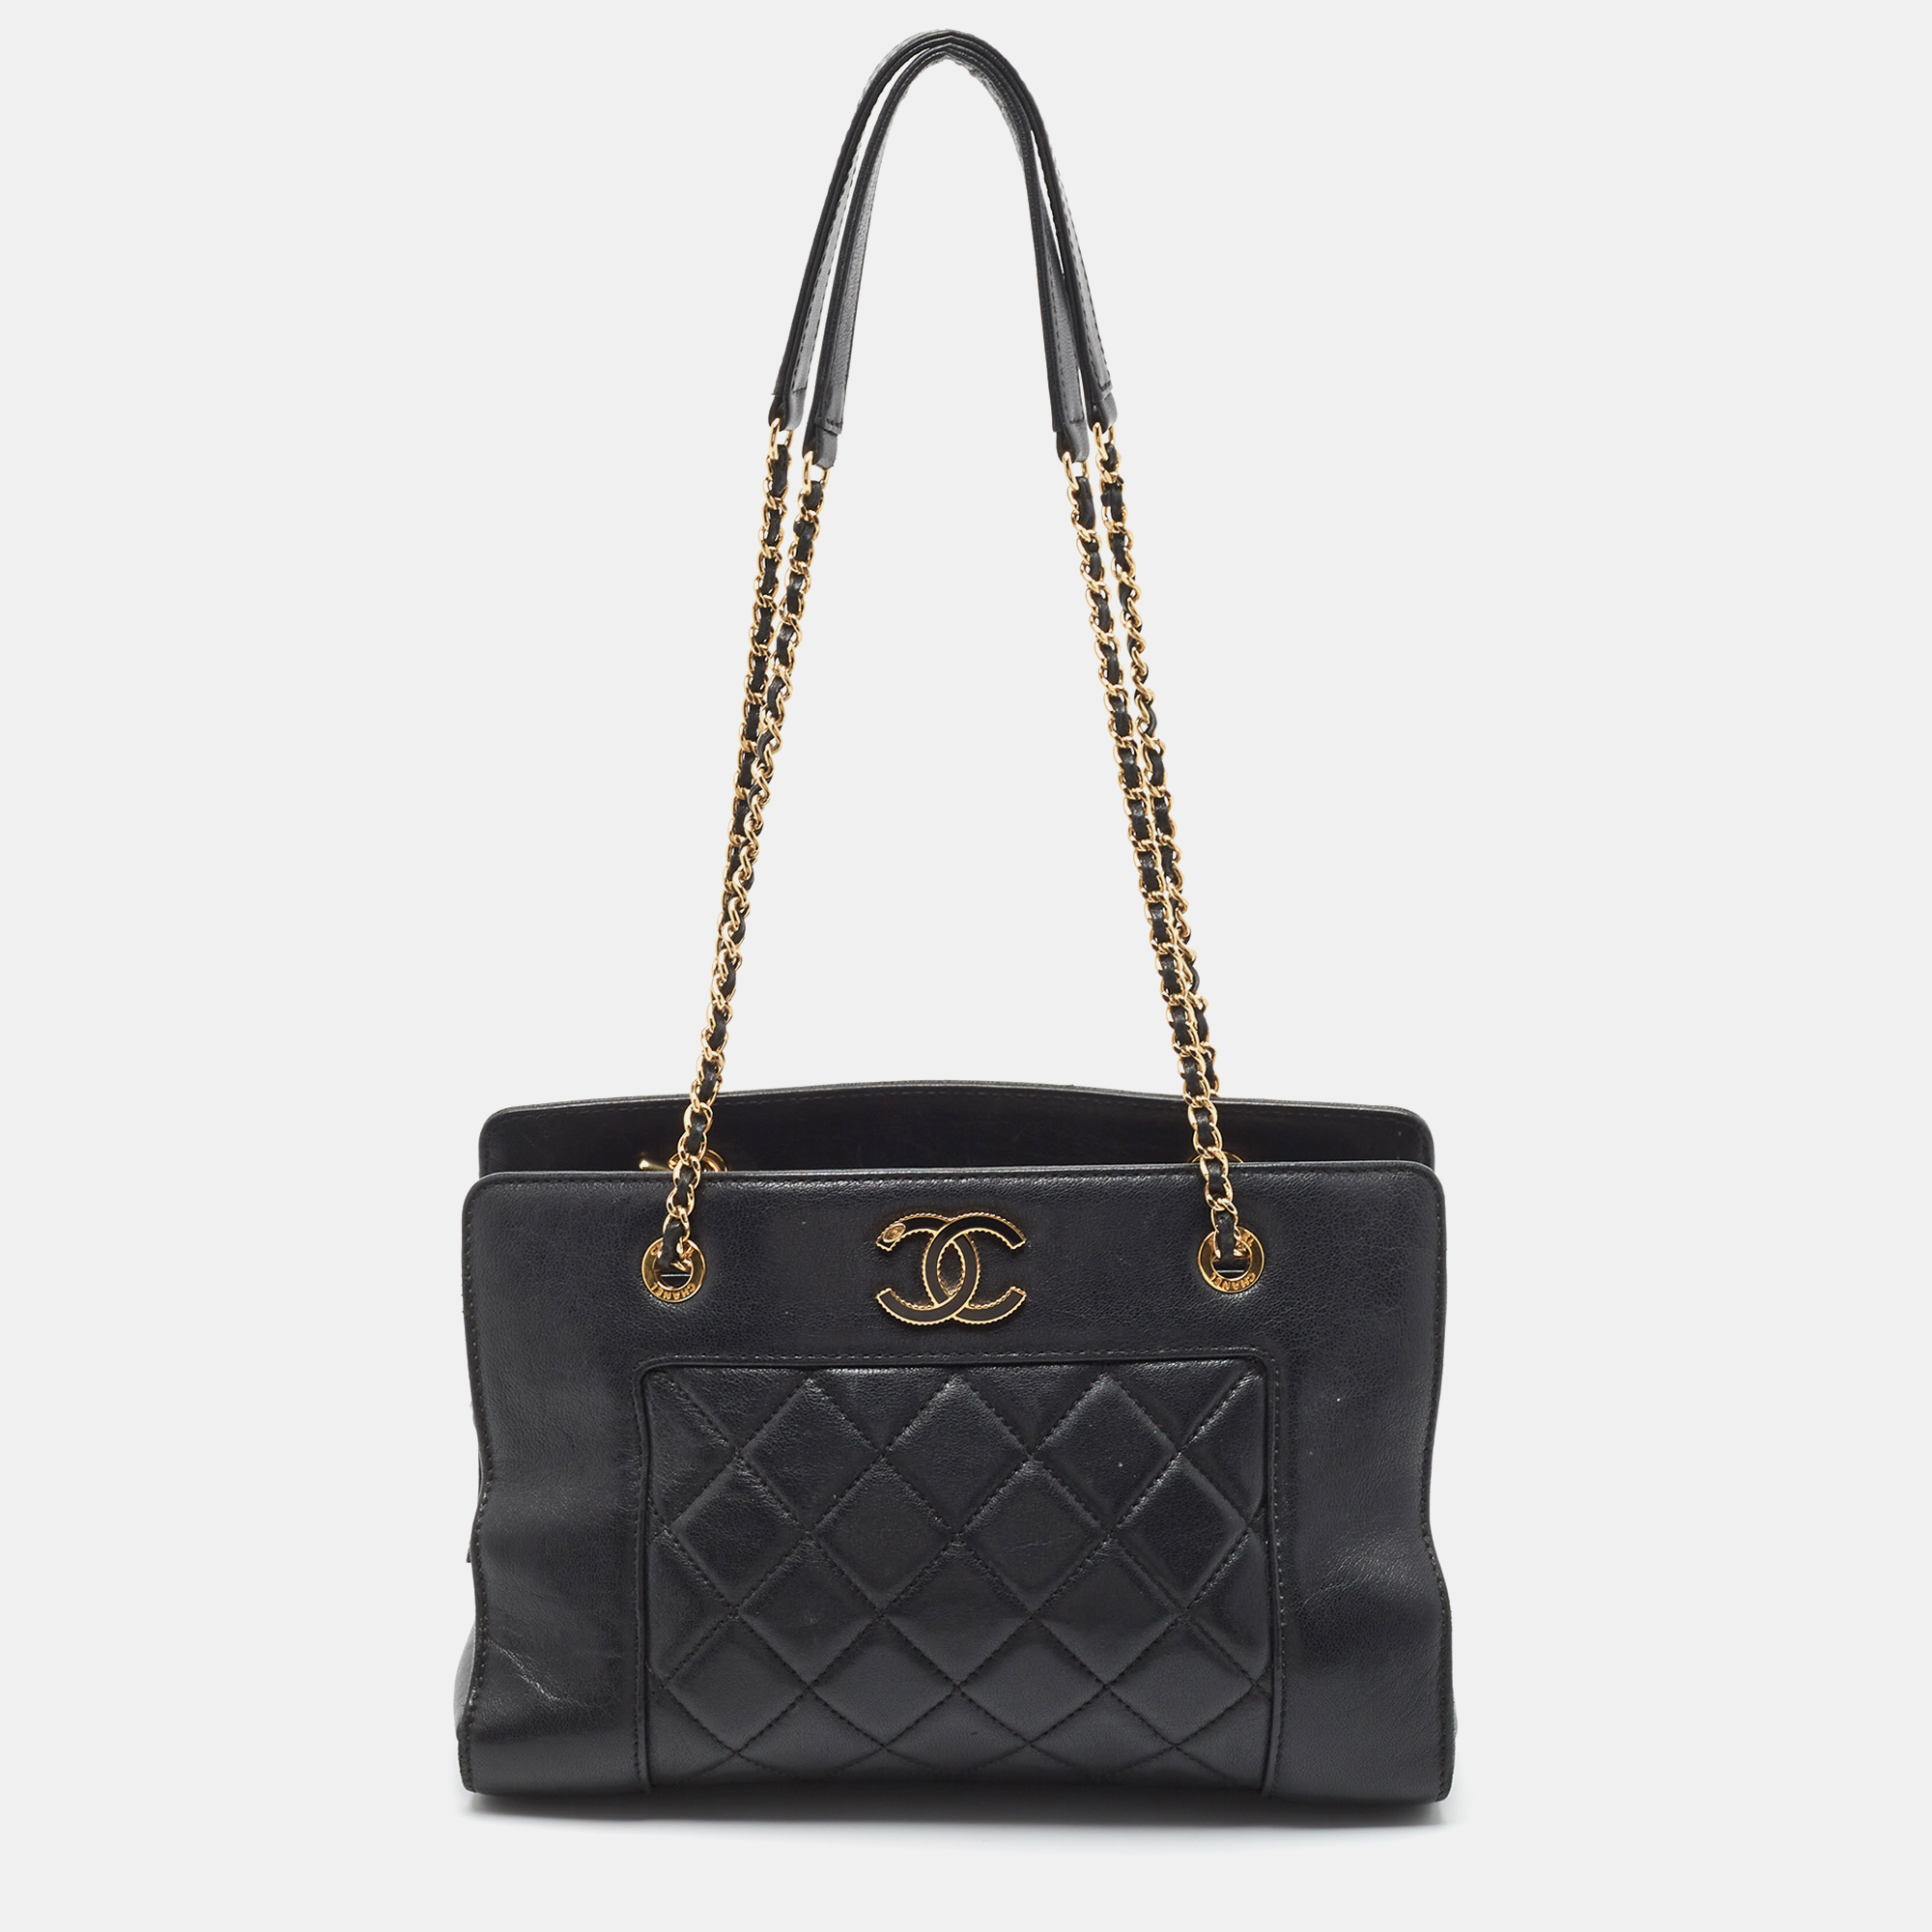 Pre-owned Chanel Black Quilted Leather Cc Chain Tote